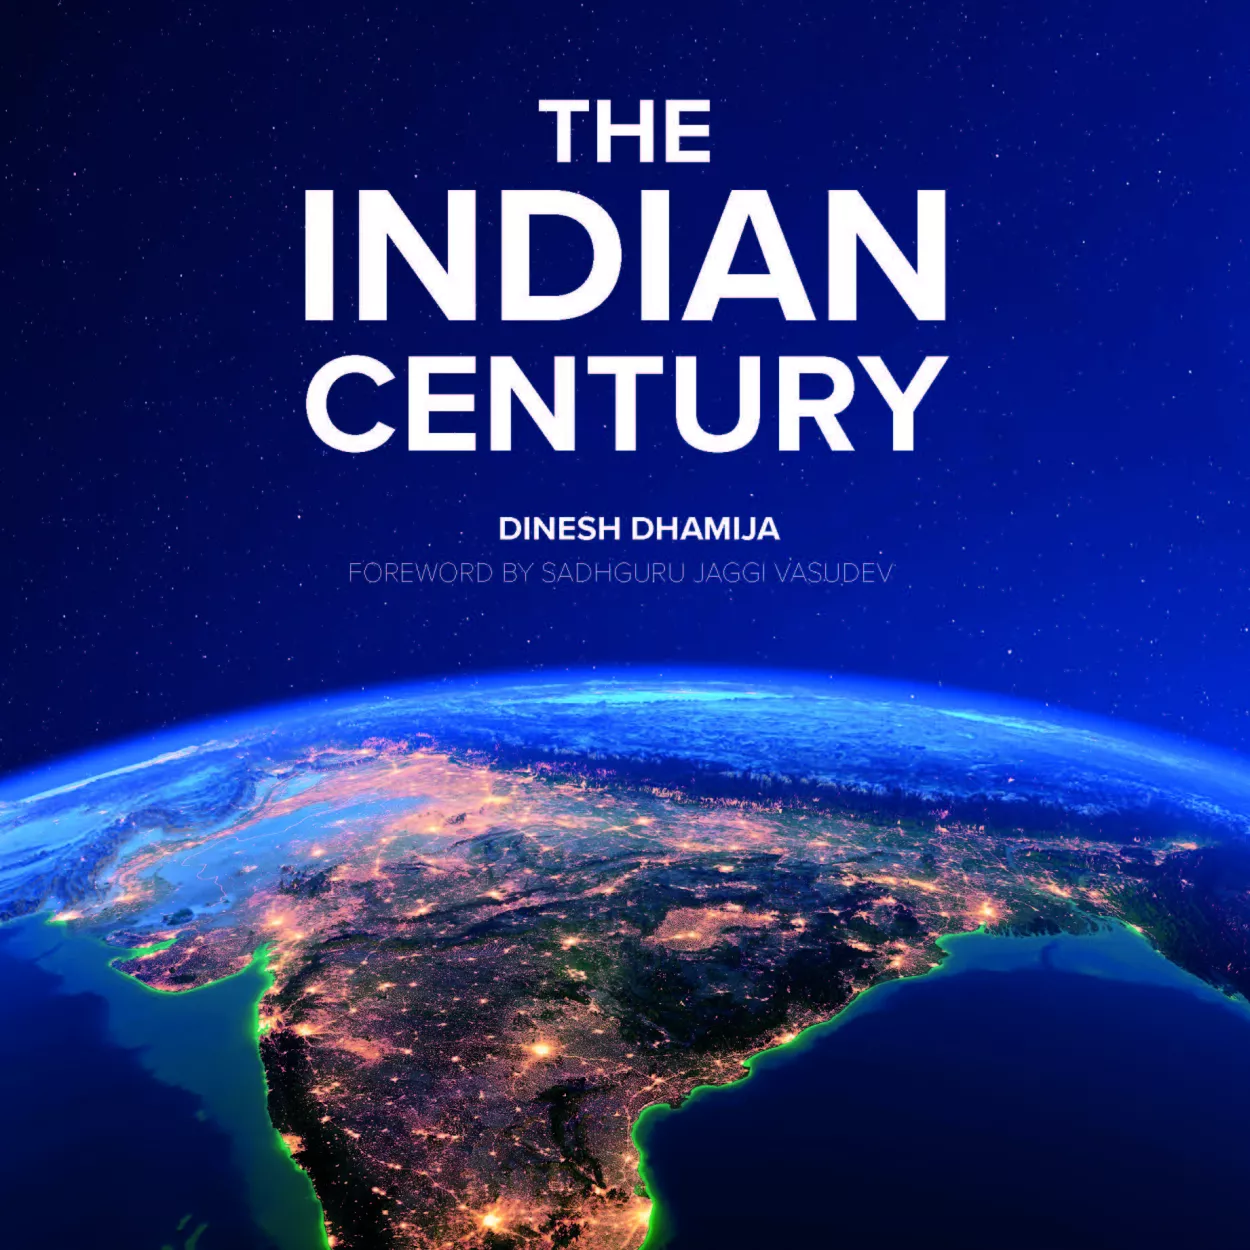 Image of book cover - satellite image of India